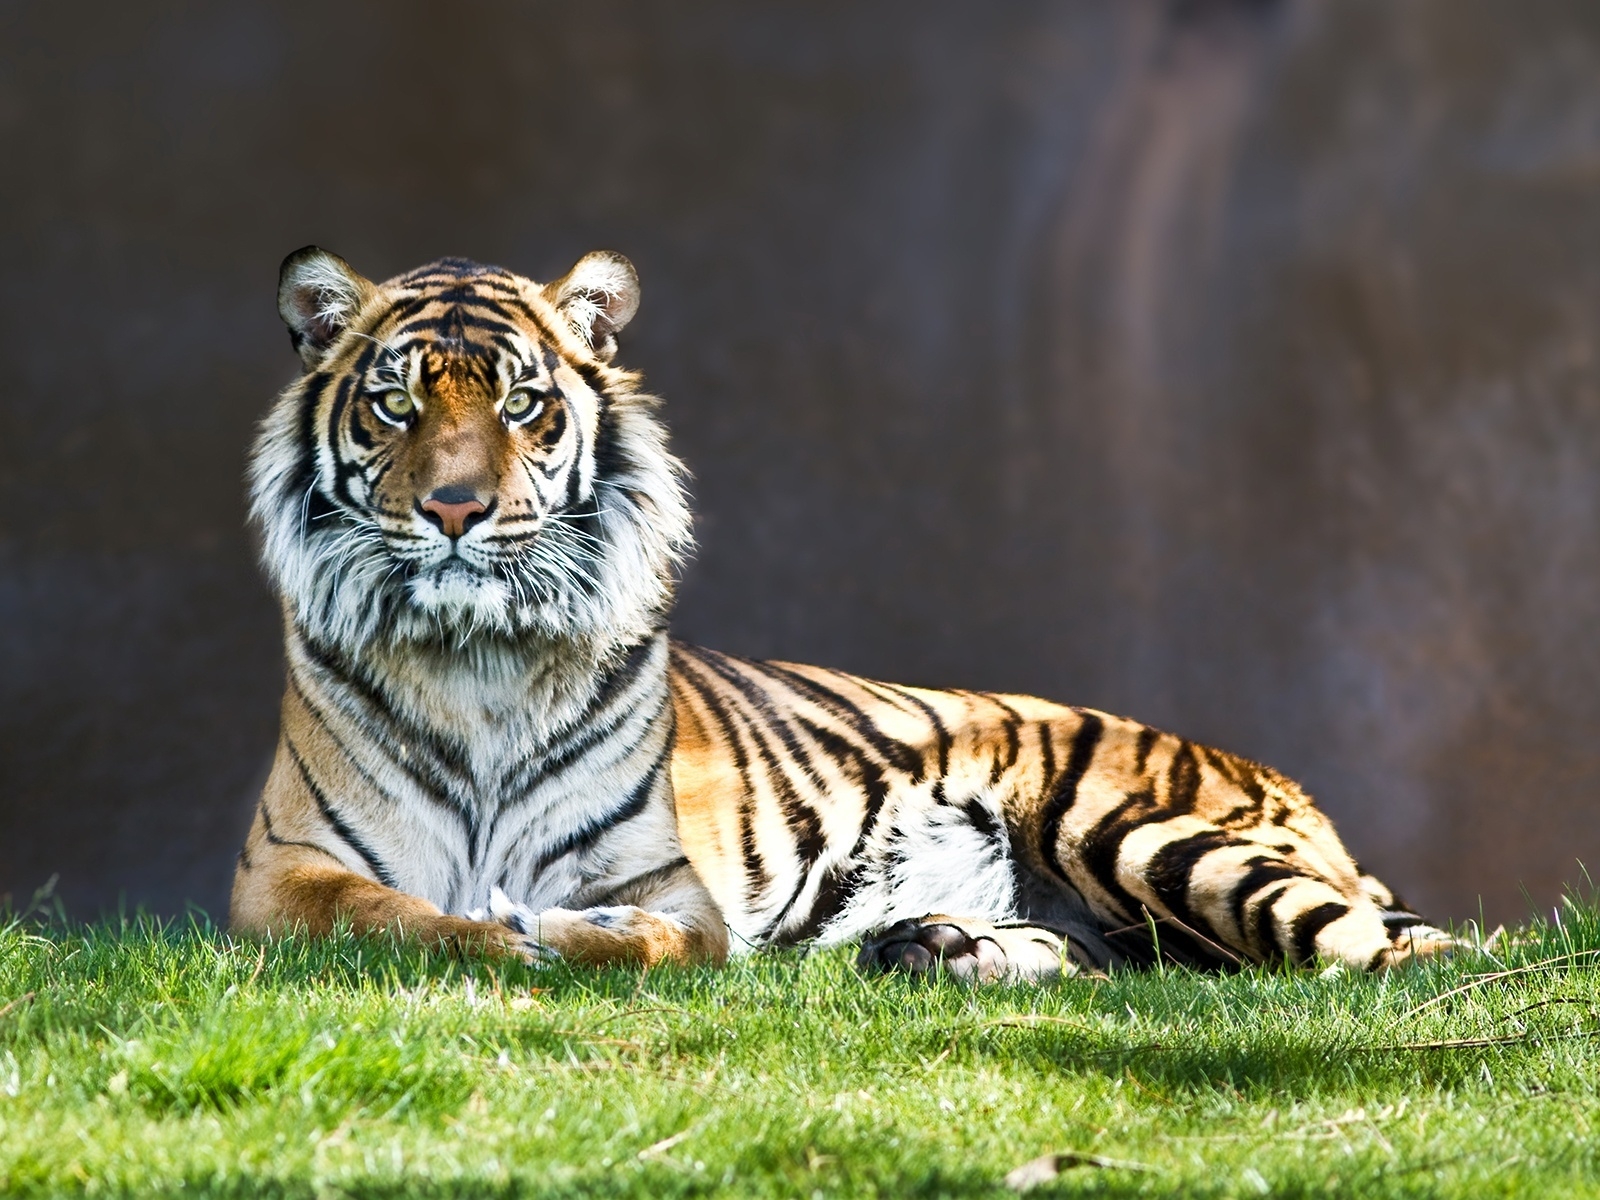 Tiger Thinking for 1600 x 1200 resolution